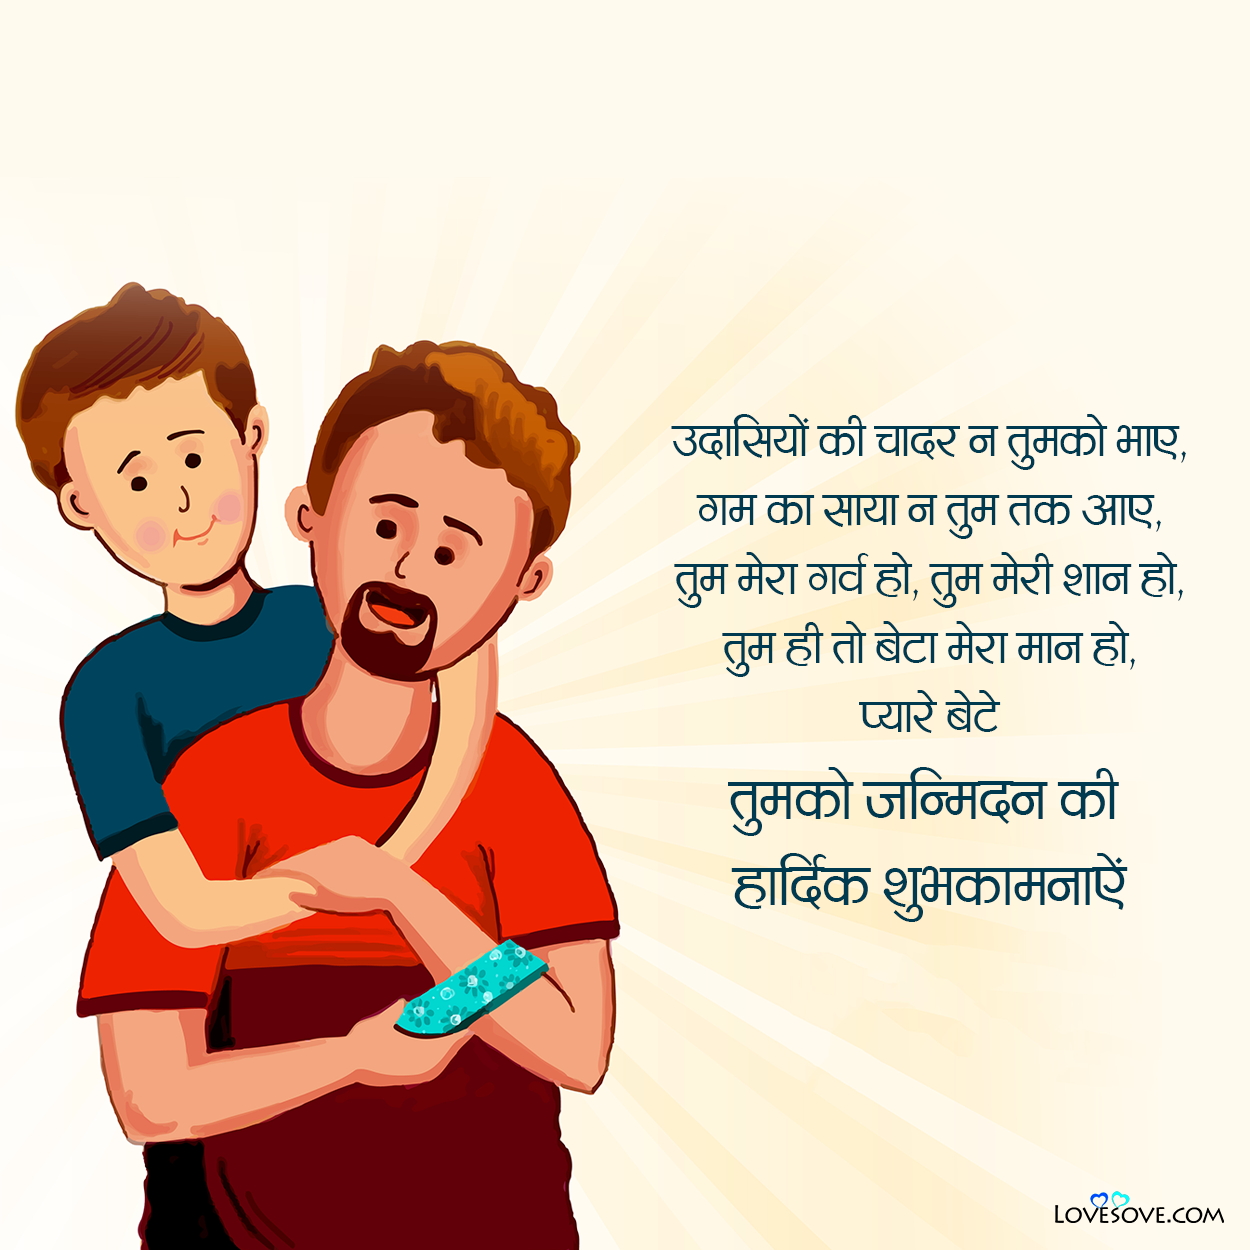 father son quotes for birthday in hindi, father son quotes in hindi for instagram